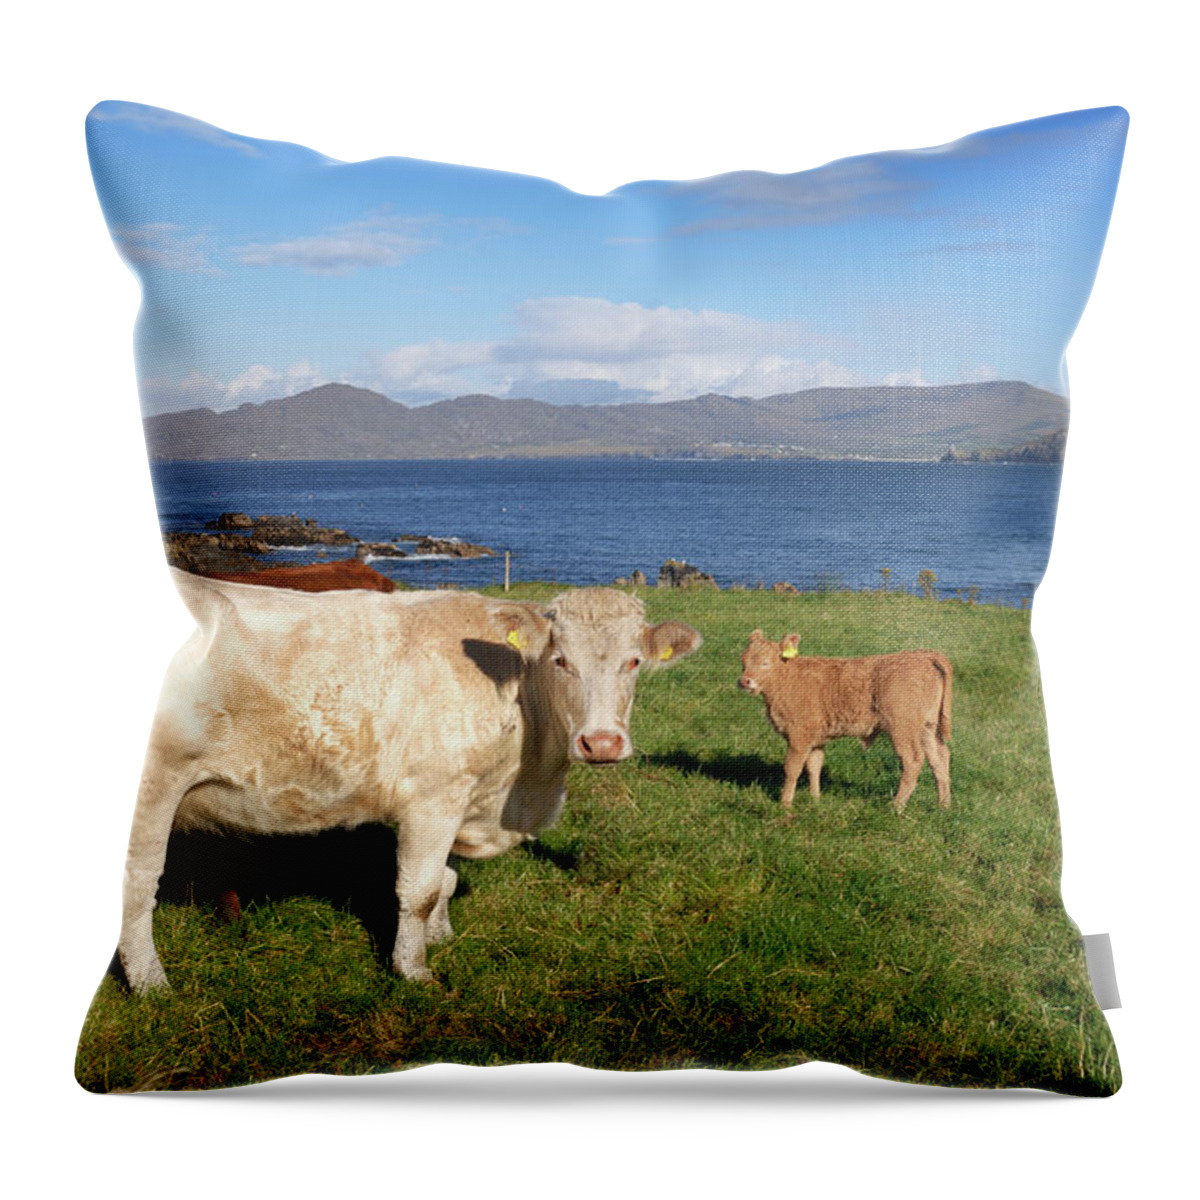 Cow Throw Pillow featuring the photograph Cattle by Johngollop